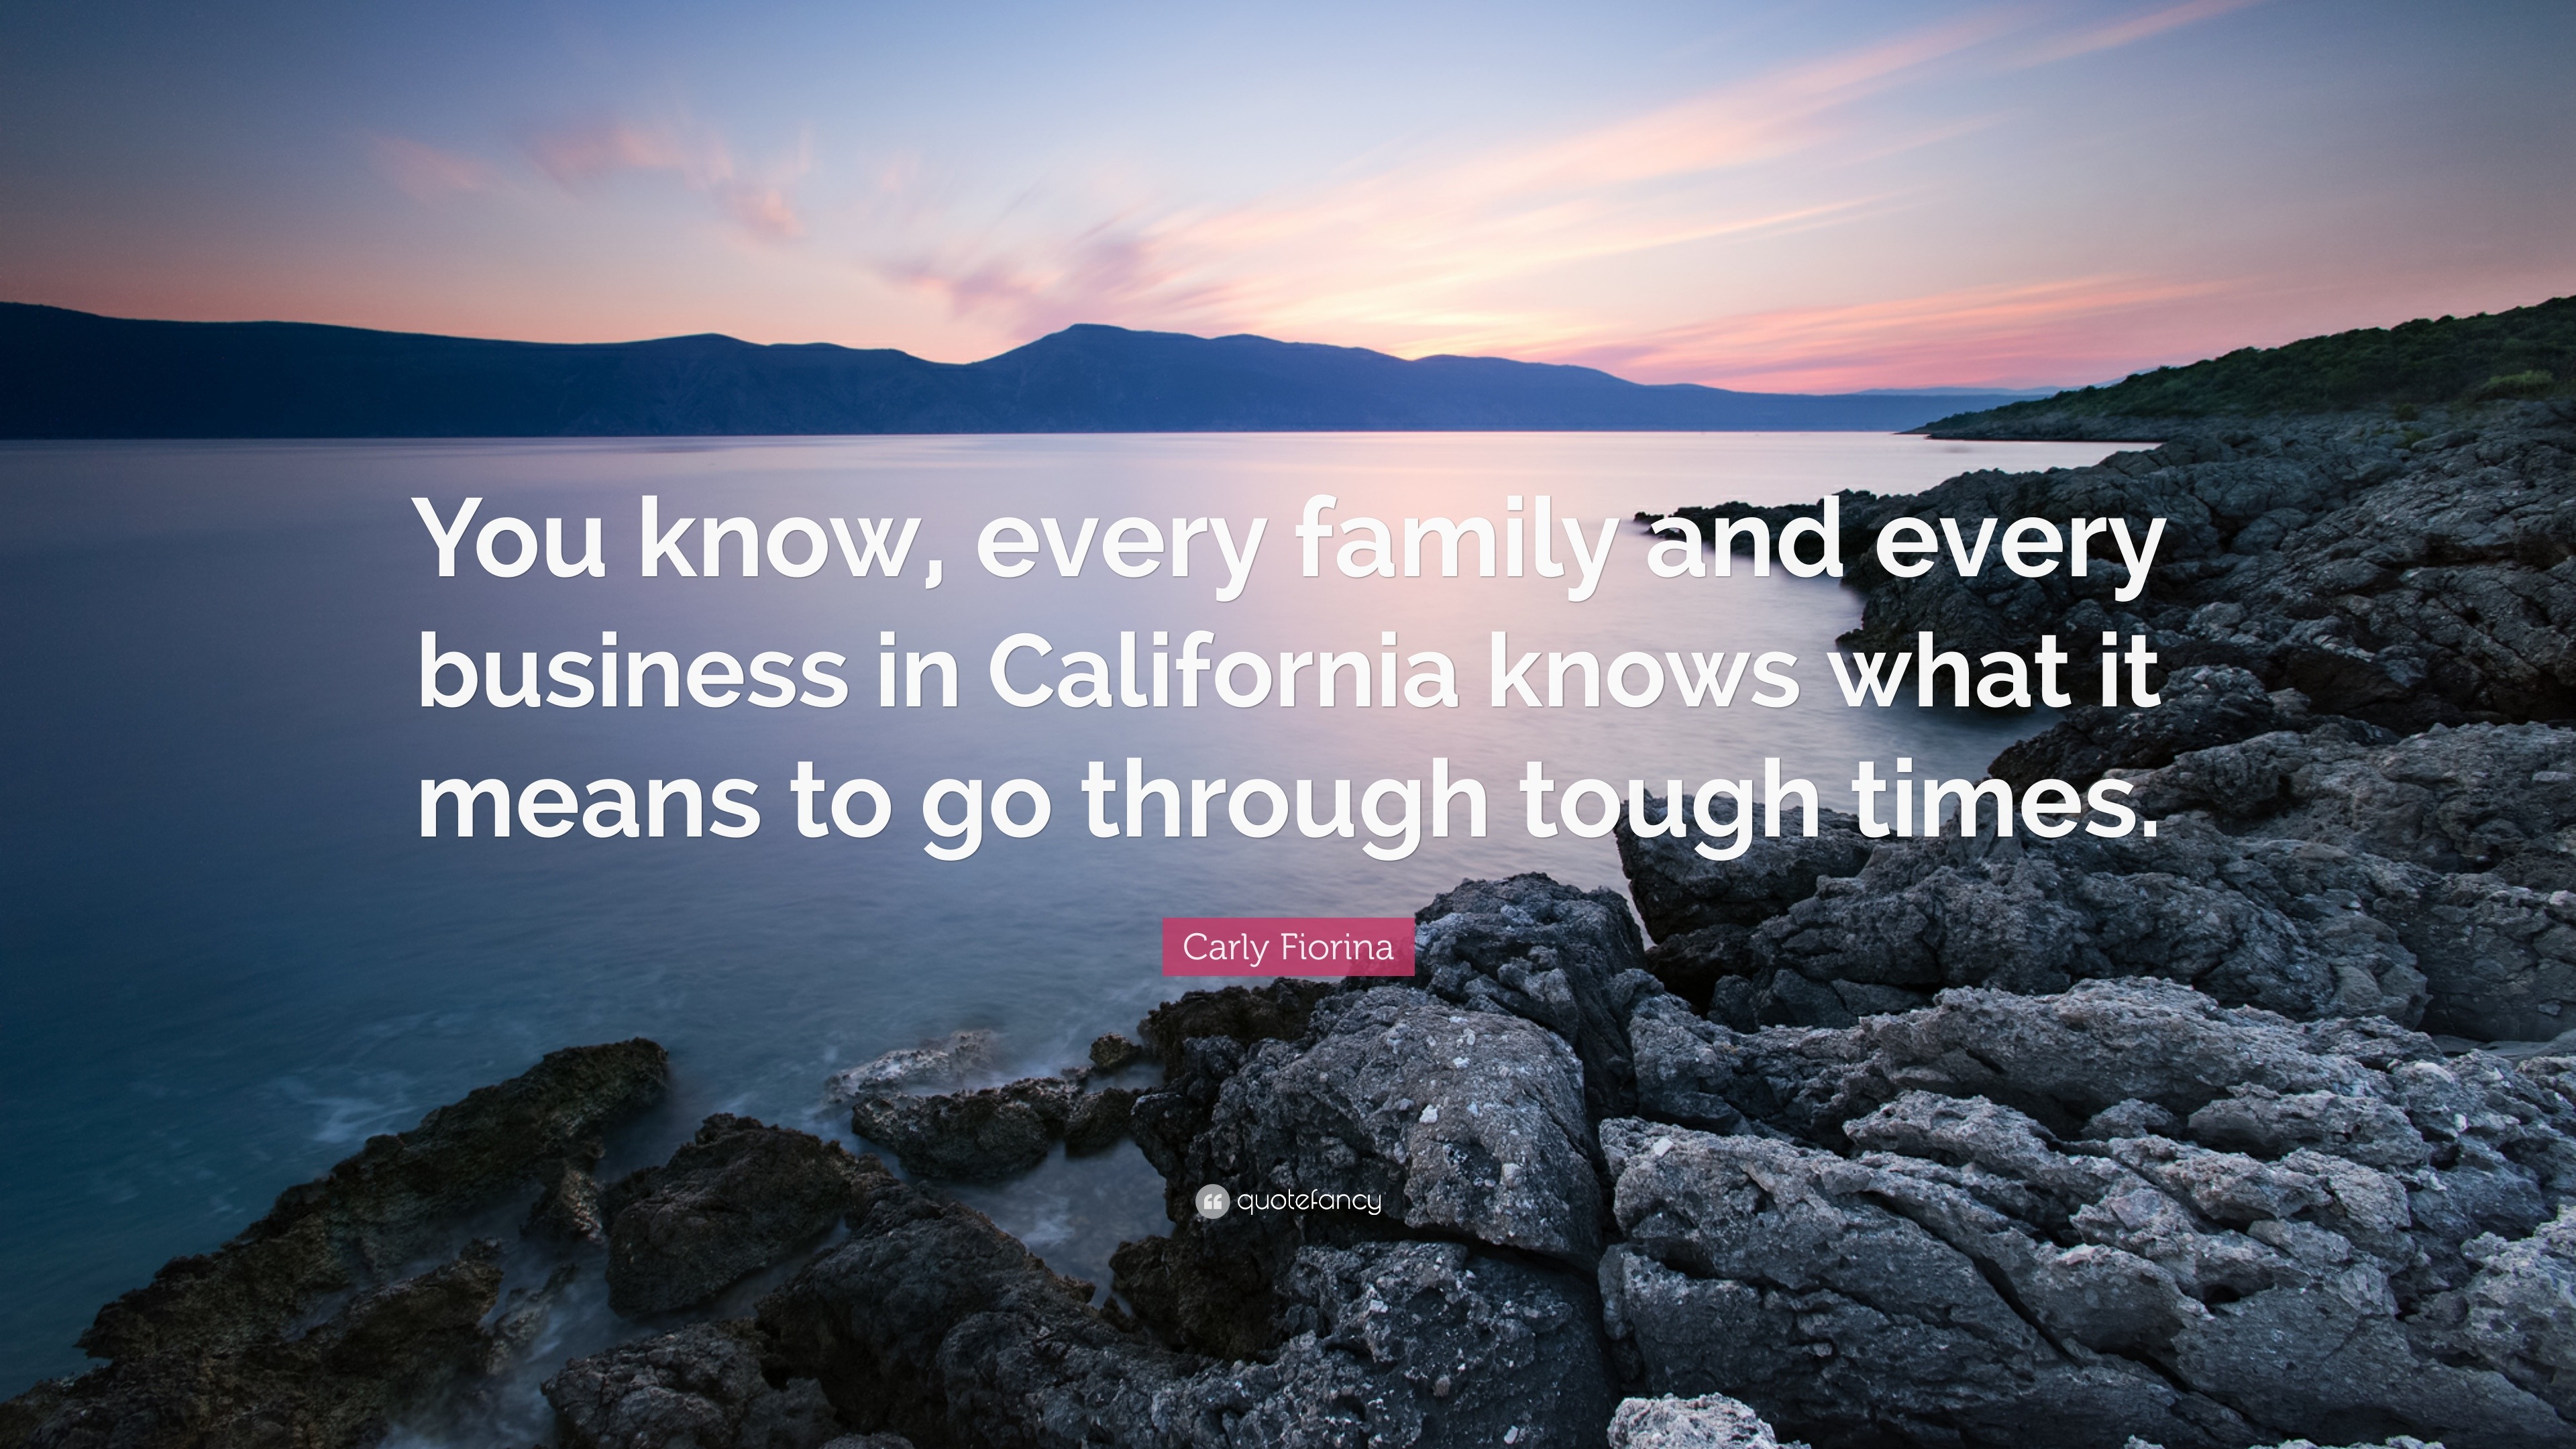 Carly Fiorina Quote You Know Every Family And Every Business In California Knows What It Means